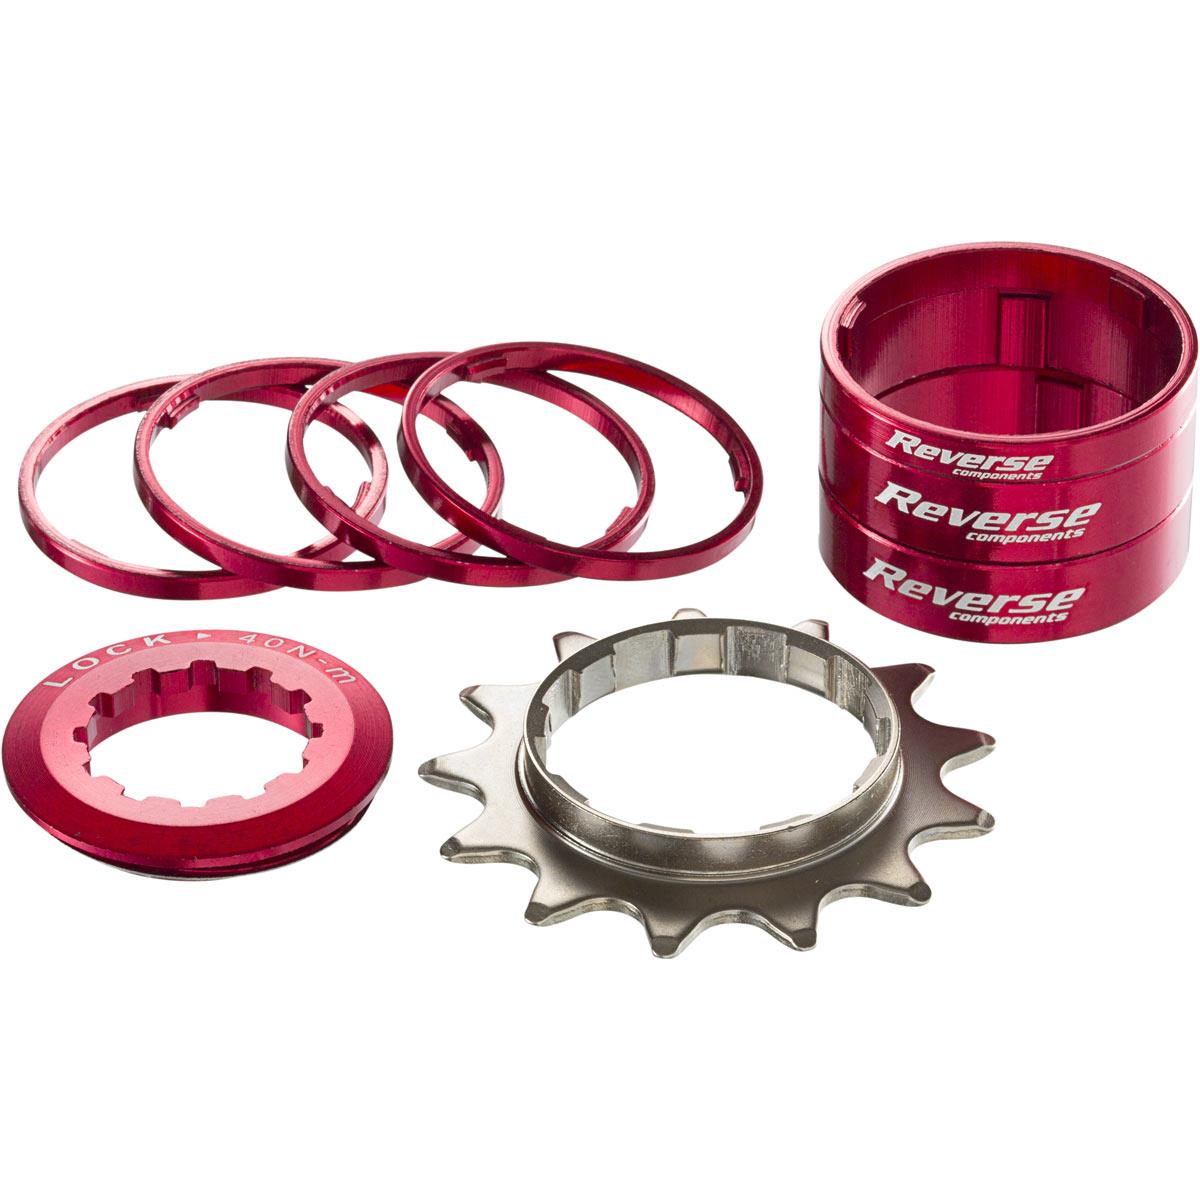 Reverse Components Singlespeed Conversion Kit  Red, 13 Teeth